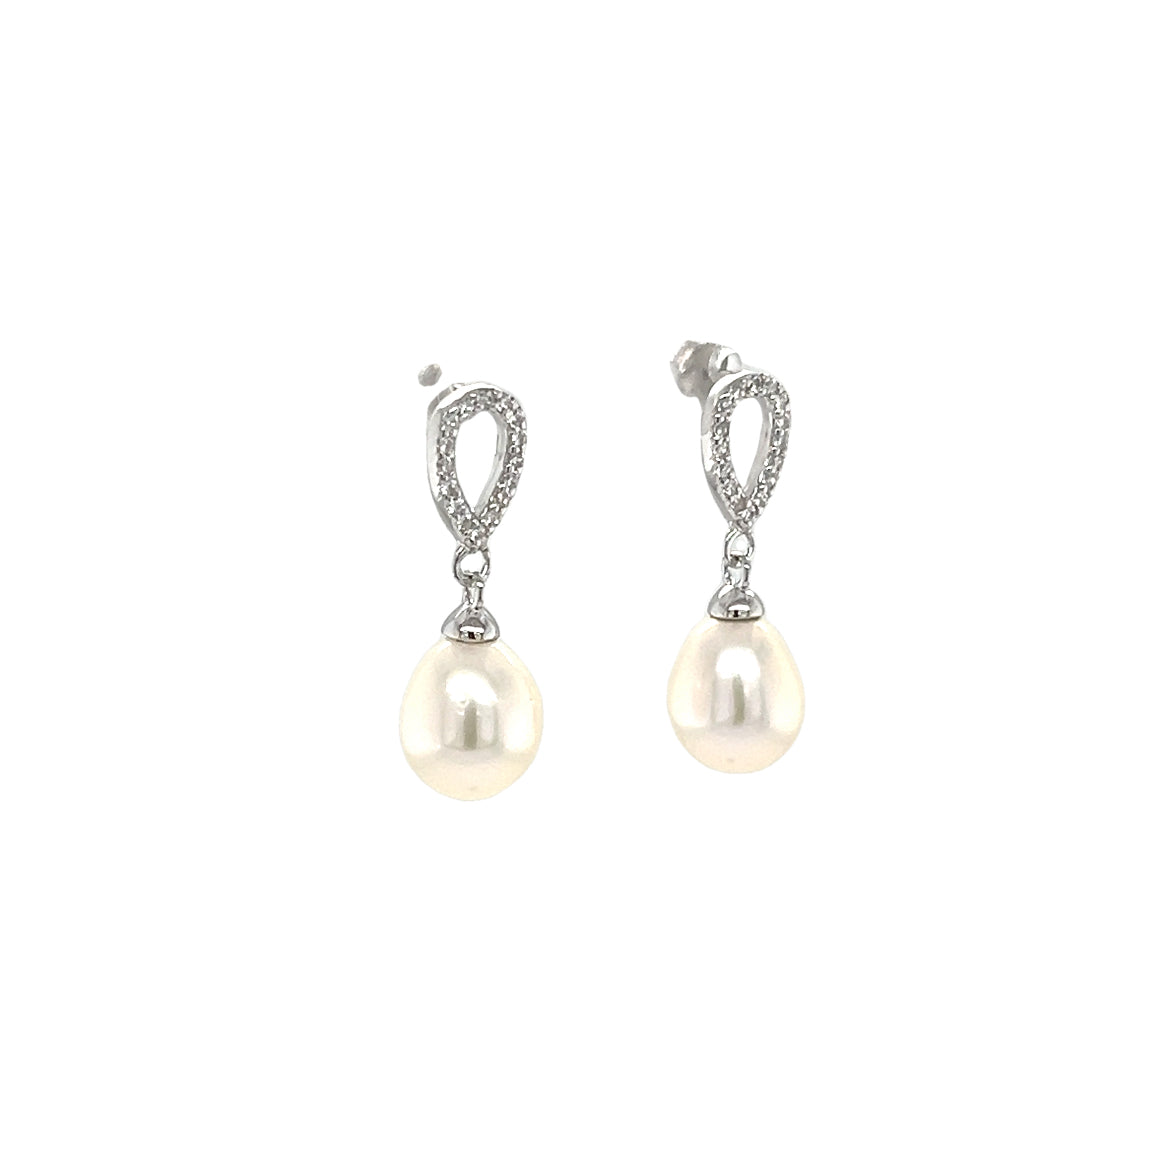 Rice Pearl Dangle Earrings with White Crystals and Sterling Silver Left Side View